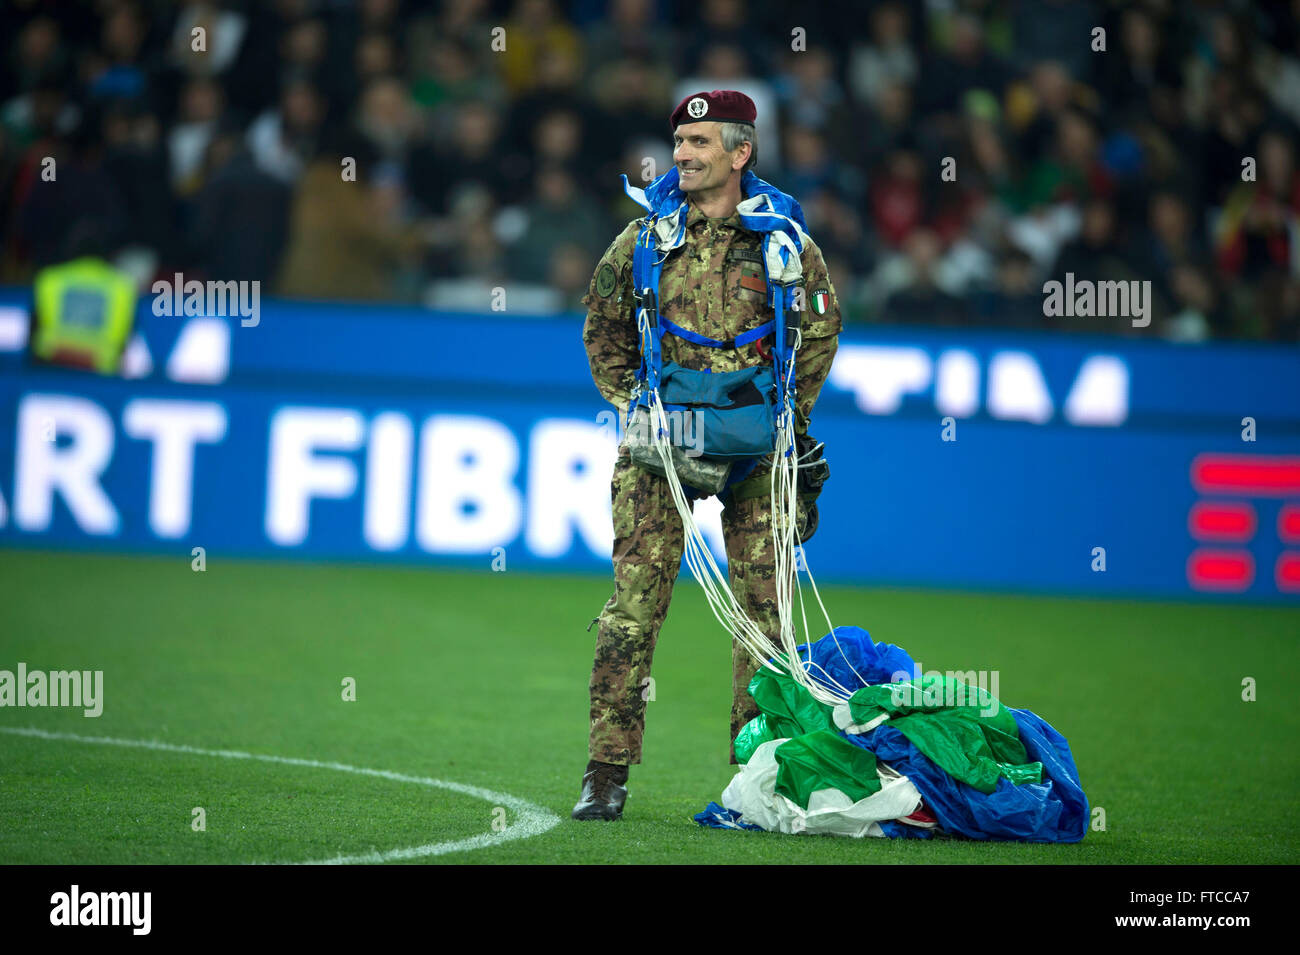 Paratroopers, MARCH 24, 2016 - Football / Soccer : International Friendly match between Italy 1-1 Spain at Friuli stadium in Udine, Italy. (Photo by Maurizio Borsari/AFLO) Stock Photo